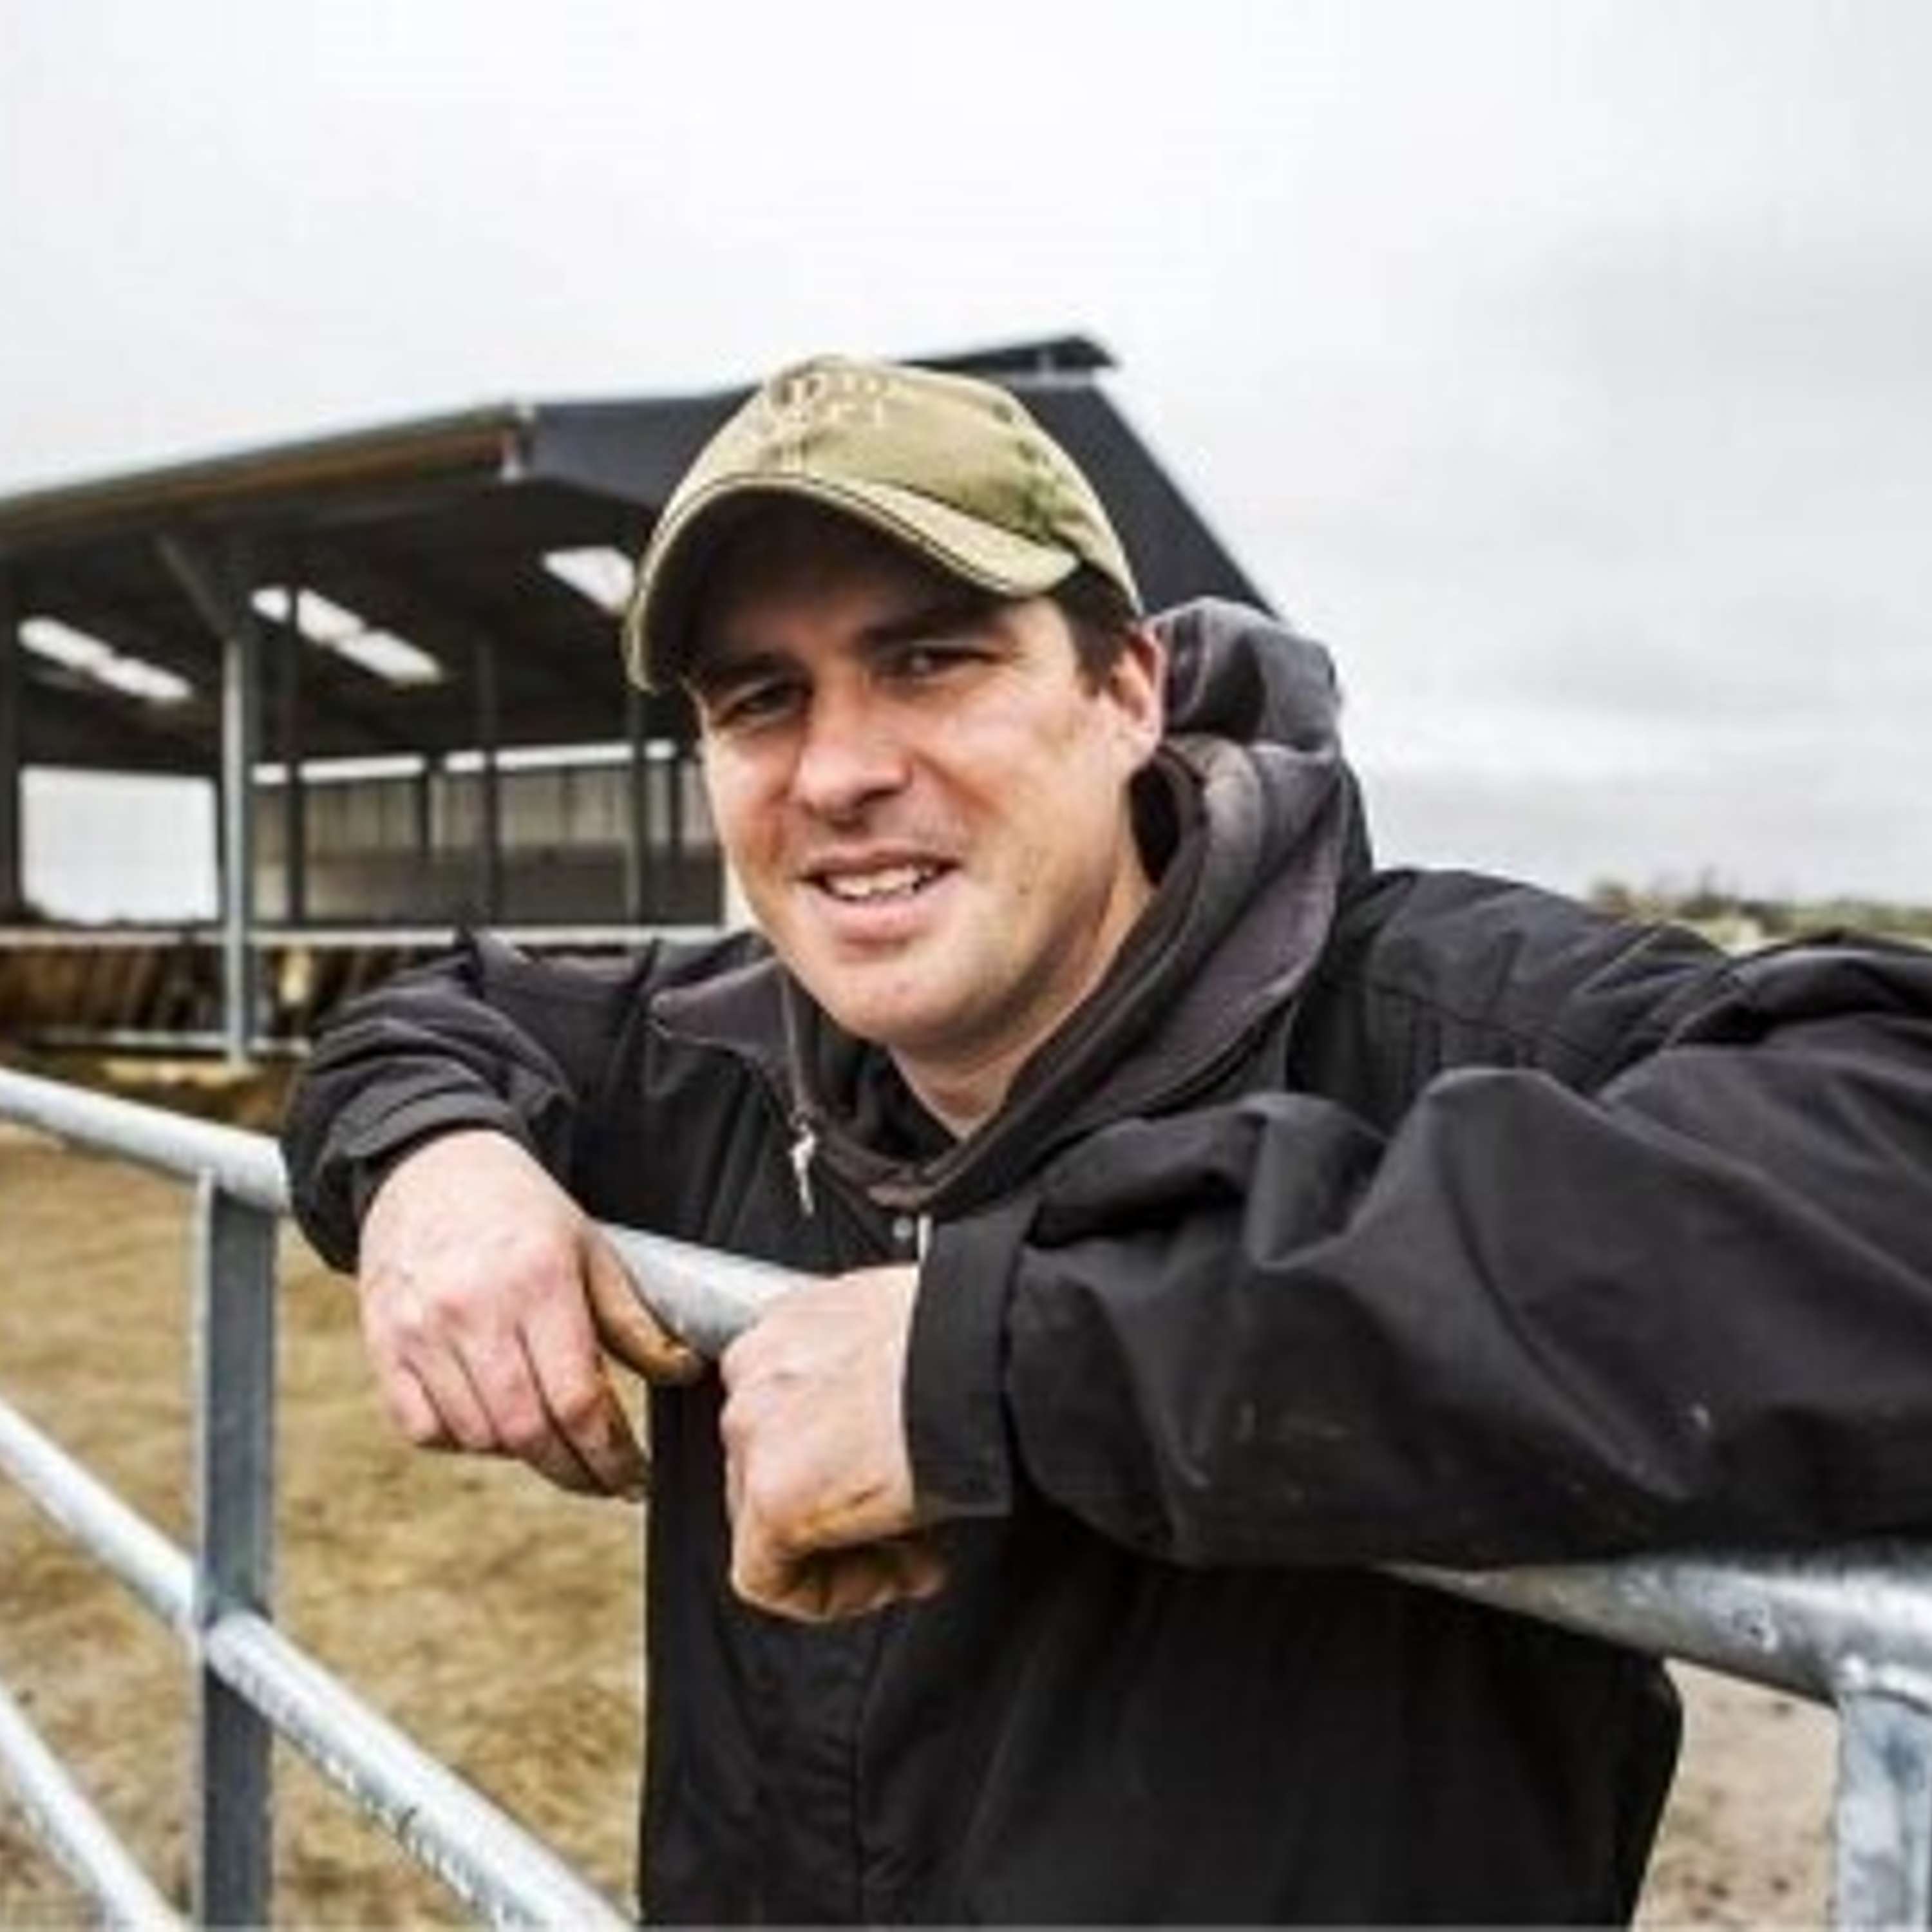 Future Beef farmer Trevor Boland gives an update on his farm